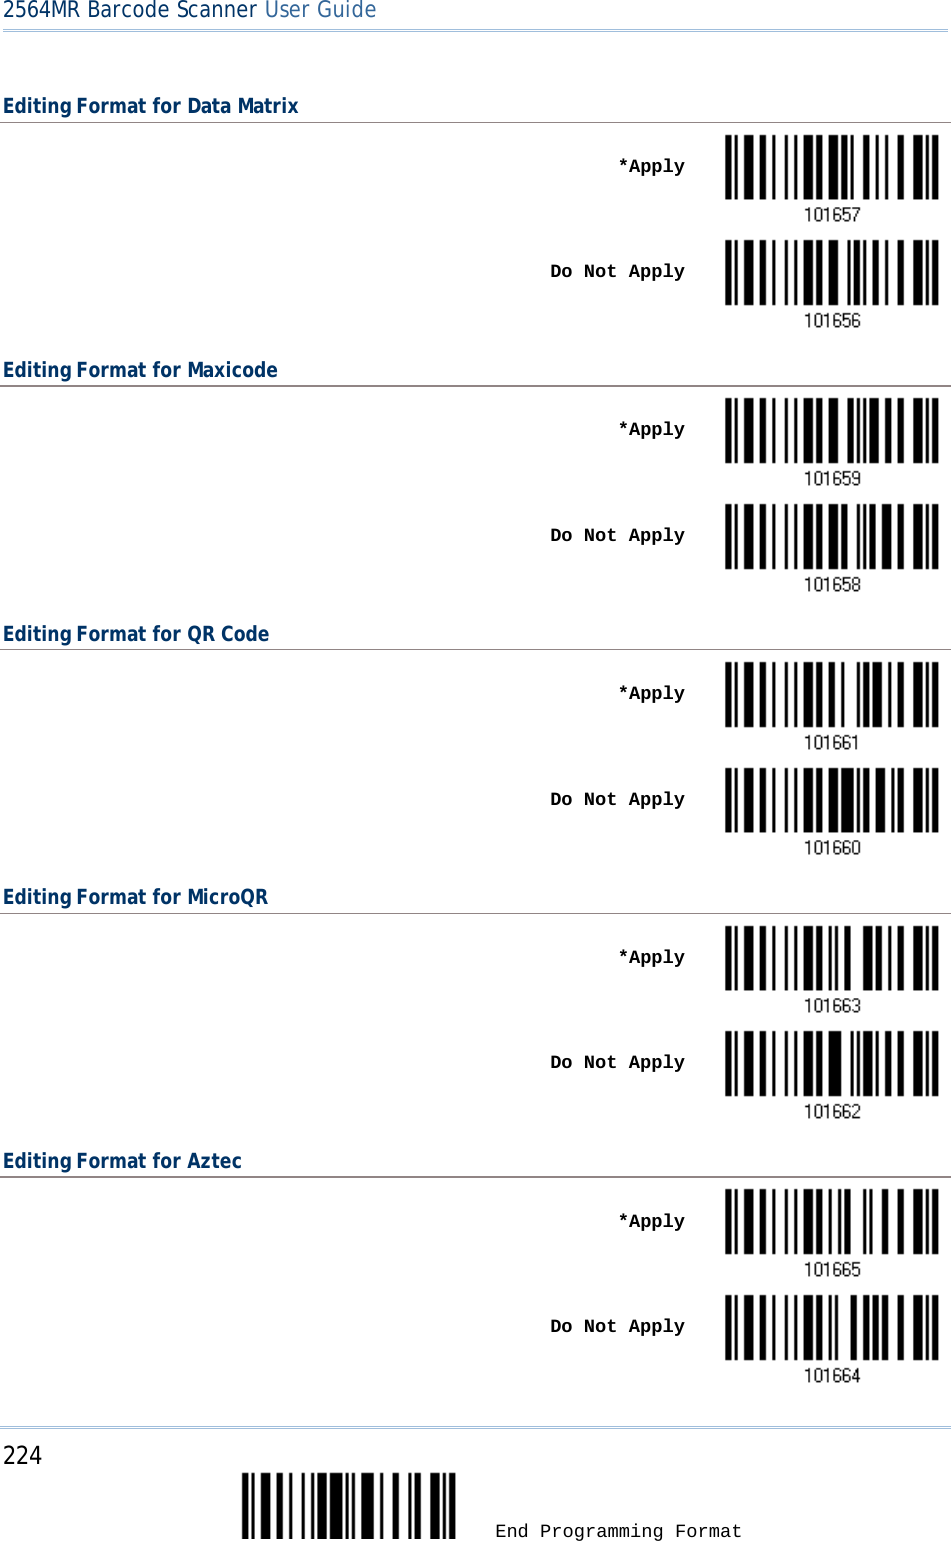 2564MR Barcode Scanner User Guide  Editing Format for Data Matrix    *Apply     Do Not Apply  Editing Format for Maxicode    *Apply     Do Not Apply  Editing Format for QR Code    *Apply     Do Not Apply  Editing Format for MicroQR    *Apply     Do Not Apply  Editing Format for Aztec    *Apply     Do Not Apply  224  End Programming Format 